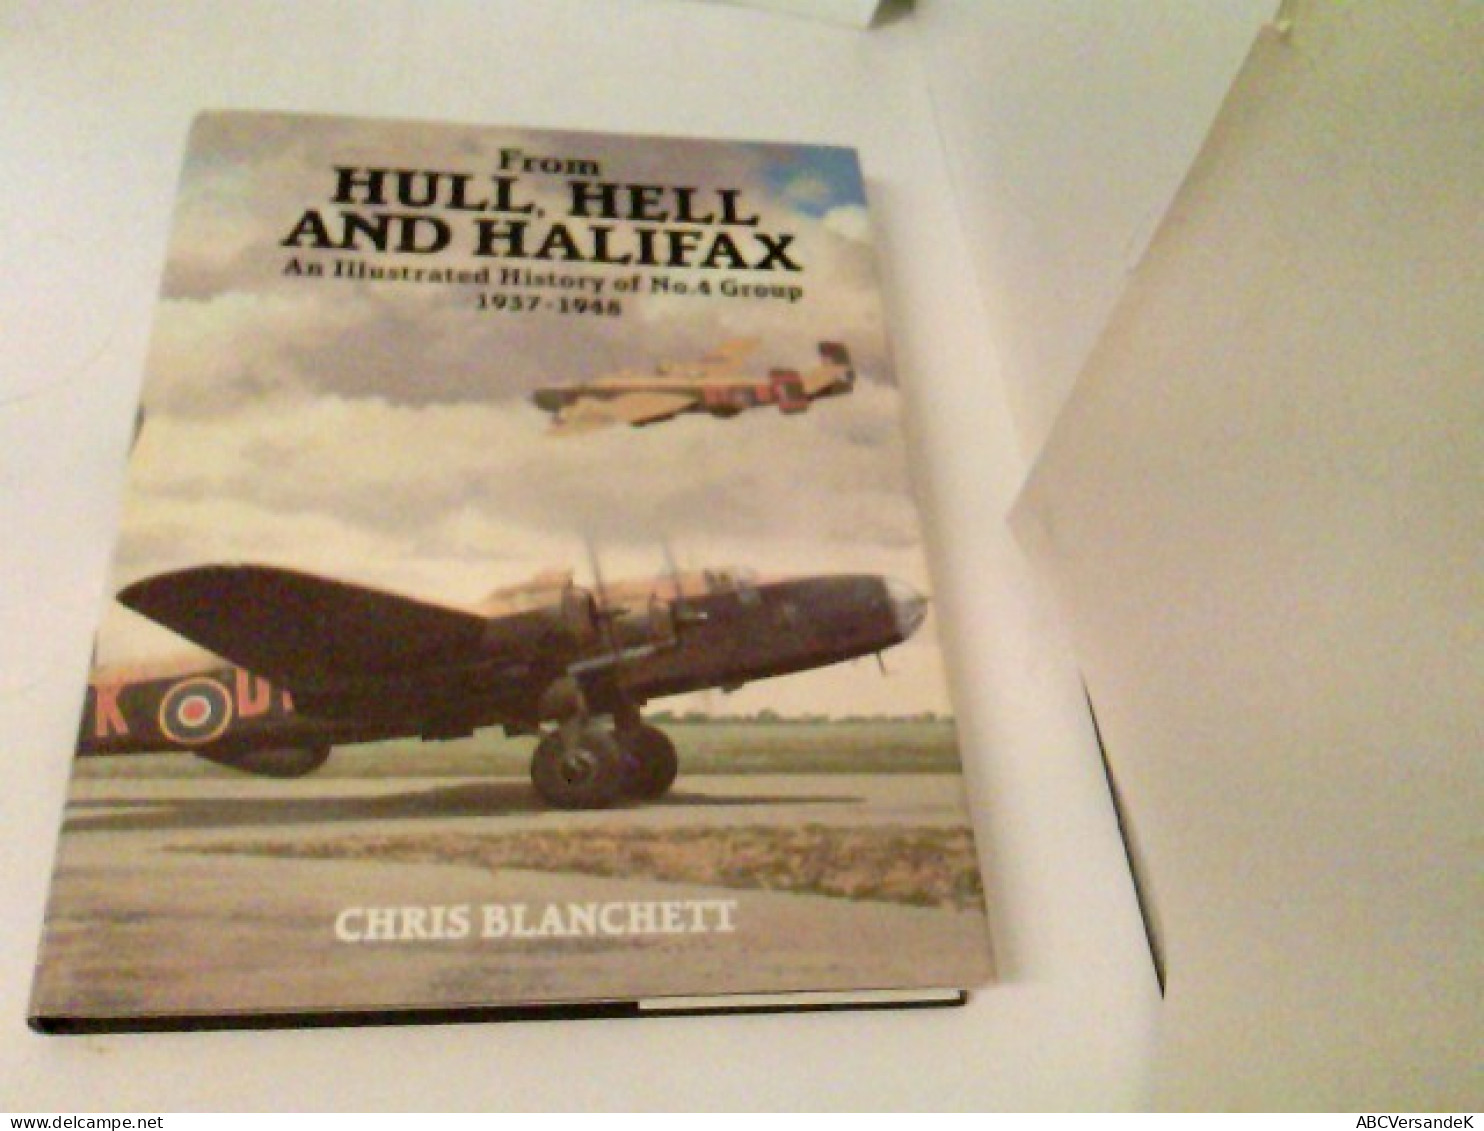 From Hull, Hell And Halifax: An Illustrated History Of No. 4 Group 1937-1948 - Transport